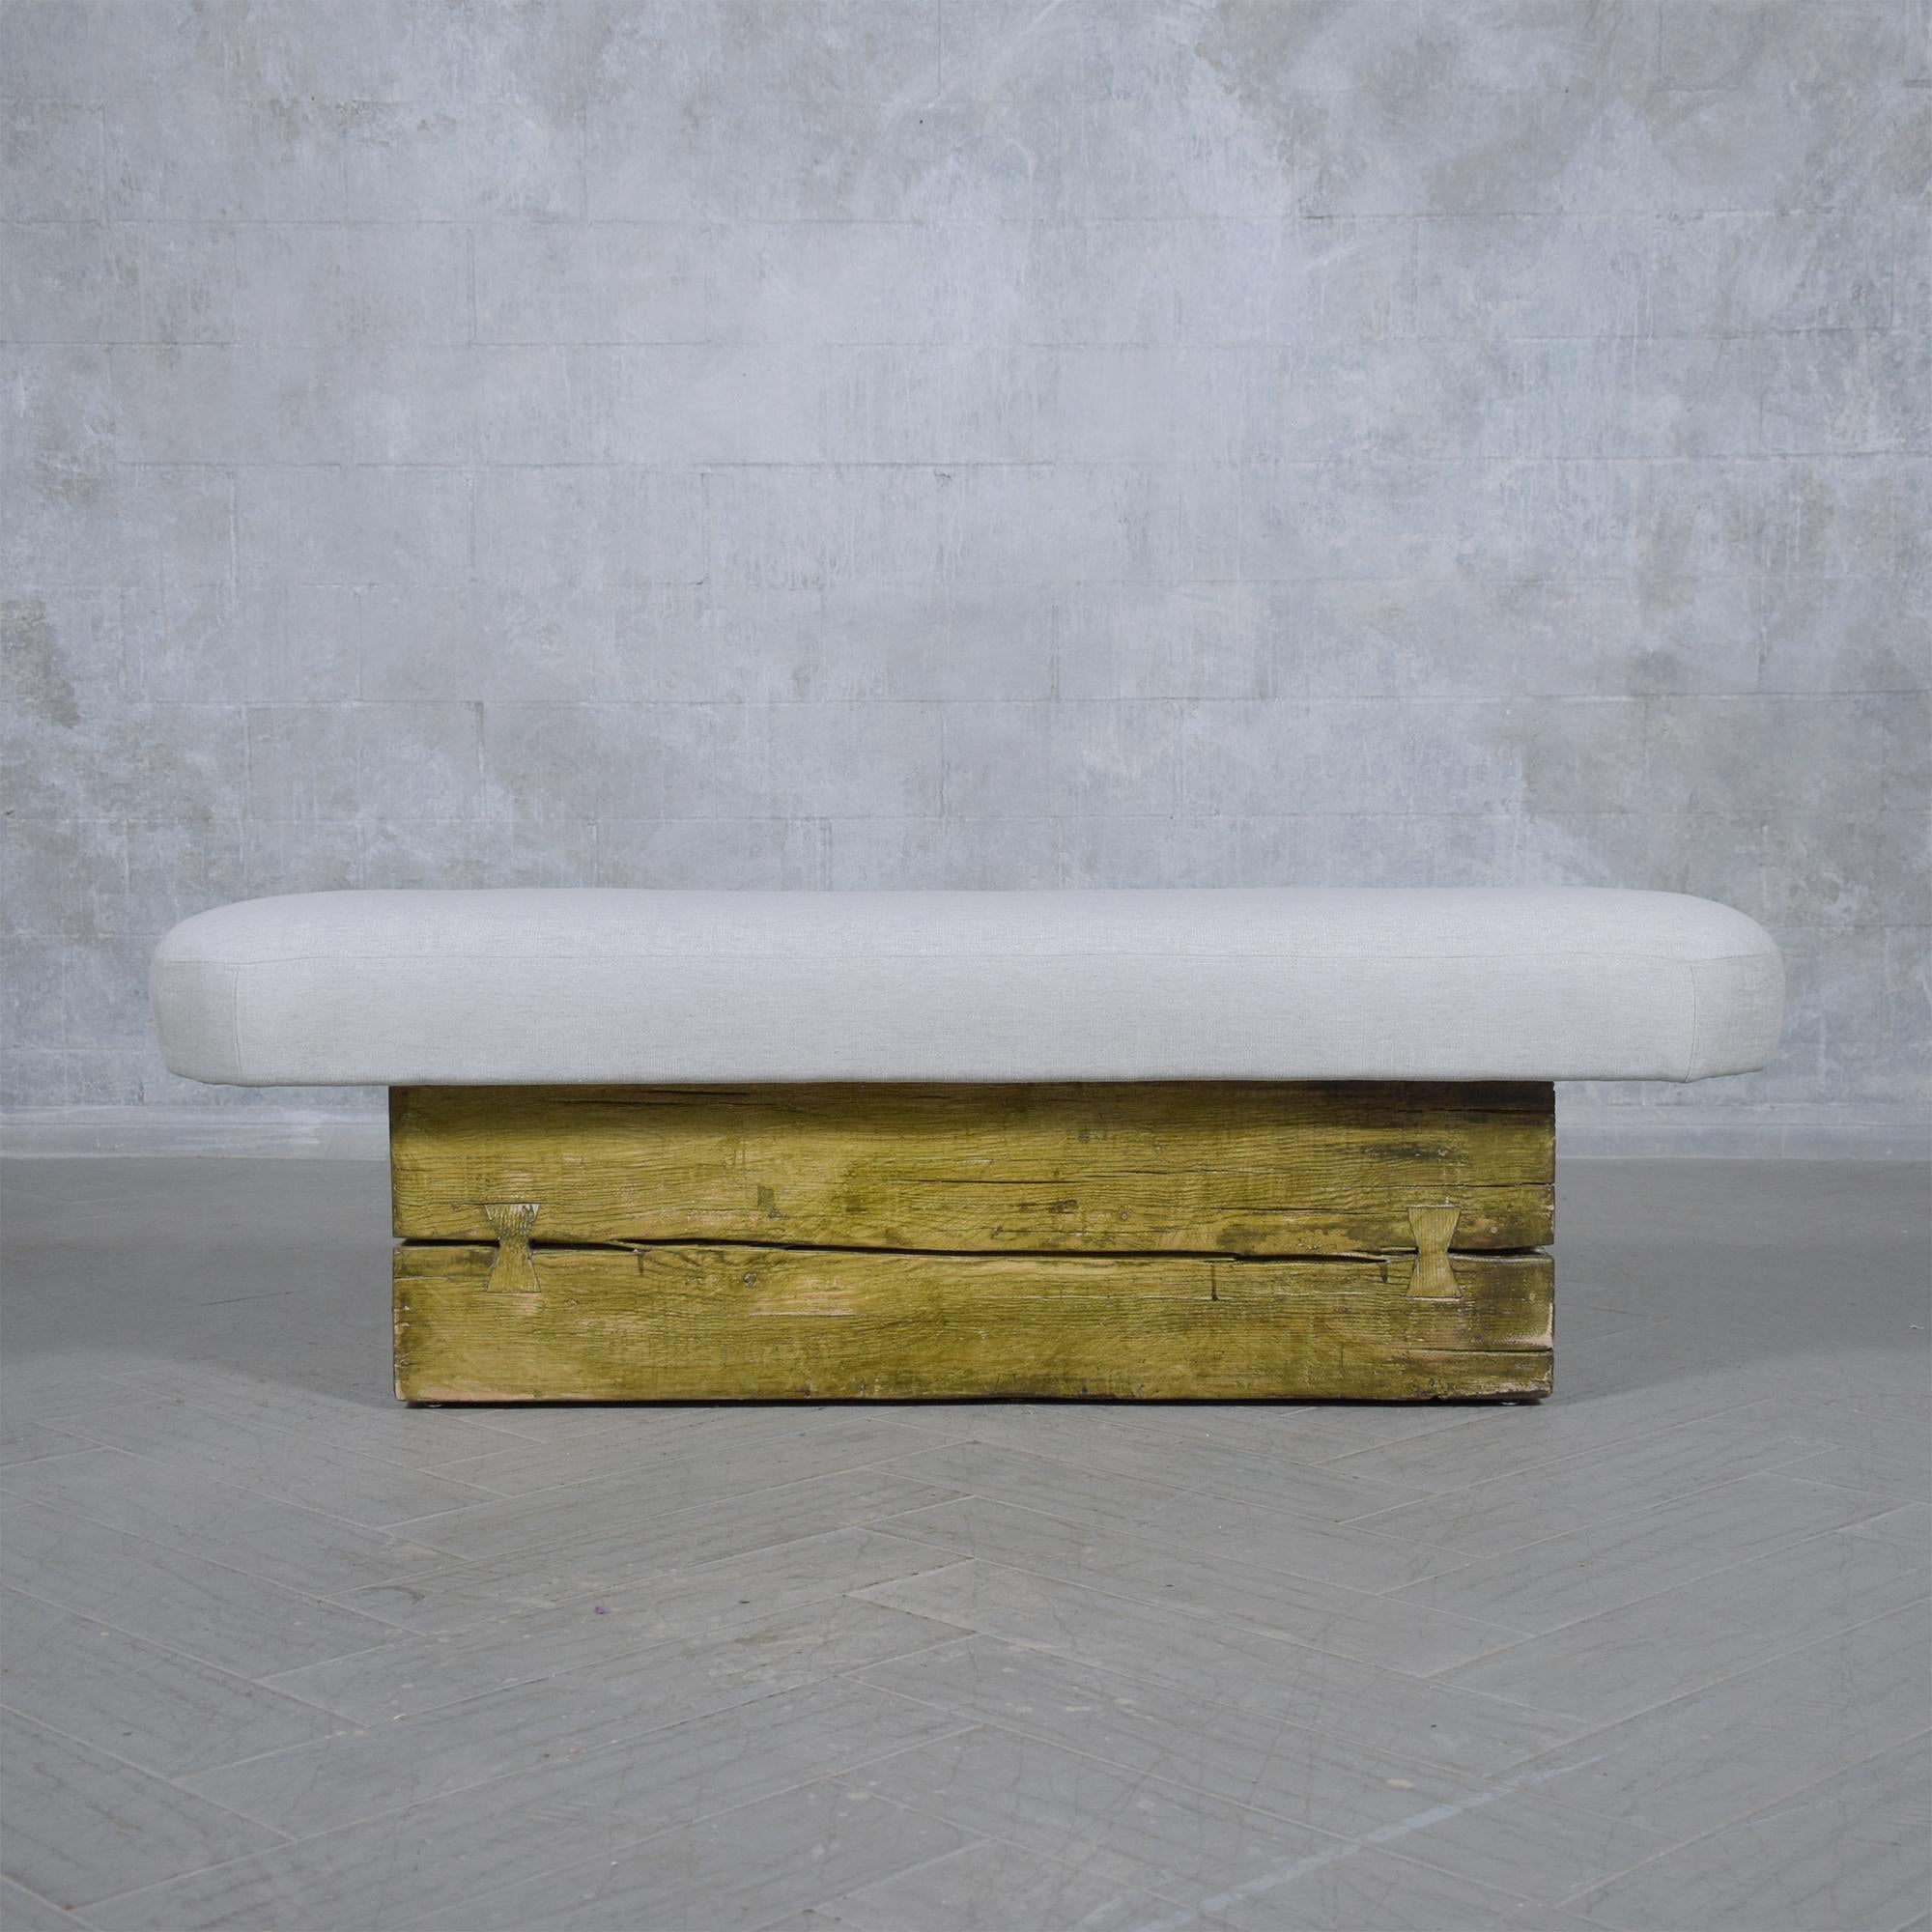 Organic Modern Restored Mid Century Modern Slab Bench with Whitewashed Finish and Linen Cushion For Sale